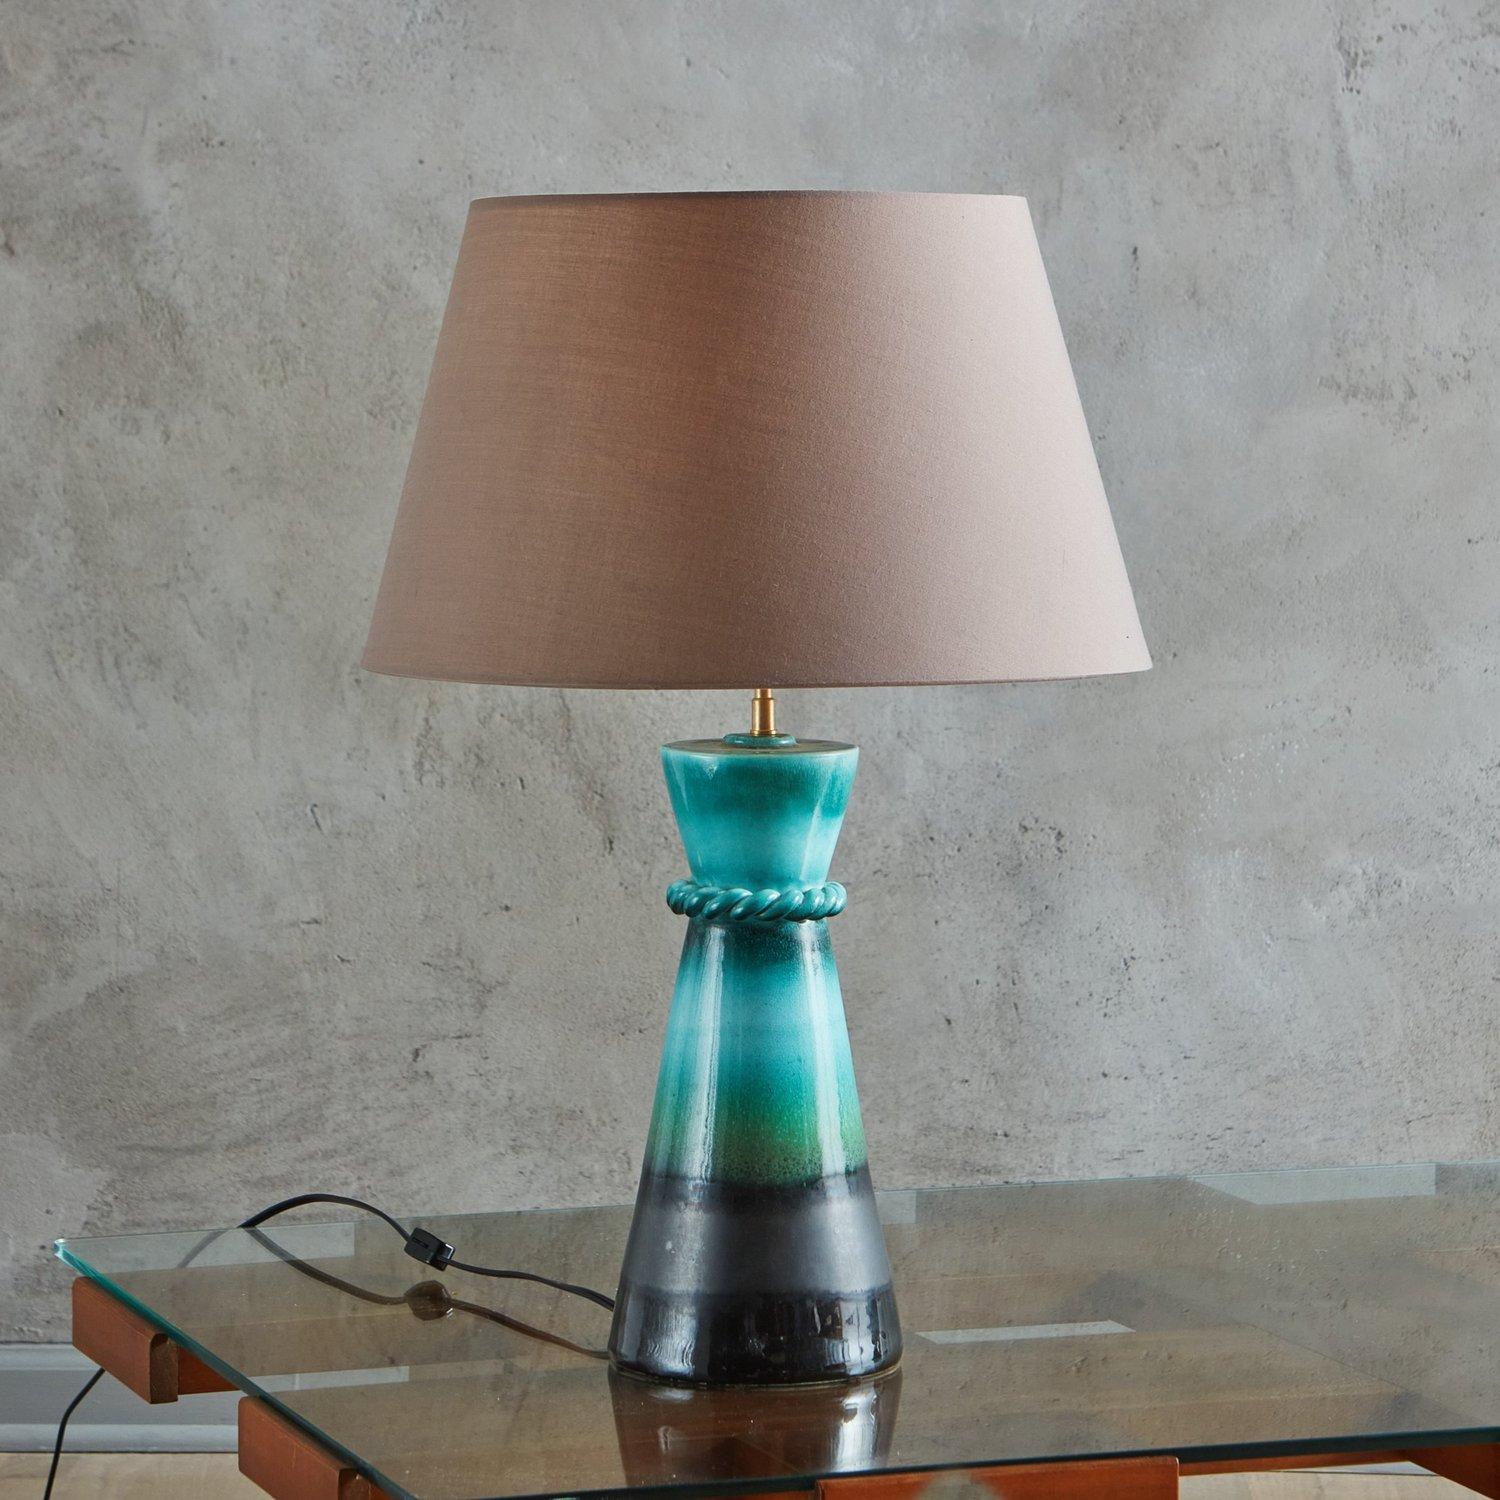 A 1940s French table lamp featuring a tapered glazed ceramic base with rich turquoise, green and black hues. This lamp has a decorative braided trim detail and a taupe fabric lampshade. Stamped ‘Made in France’ on base, 1940s.

Base: 6